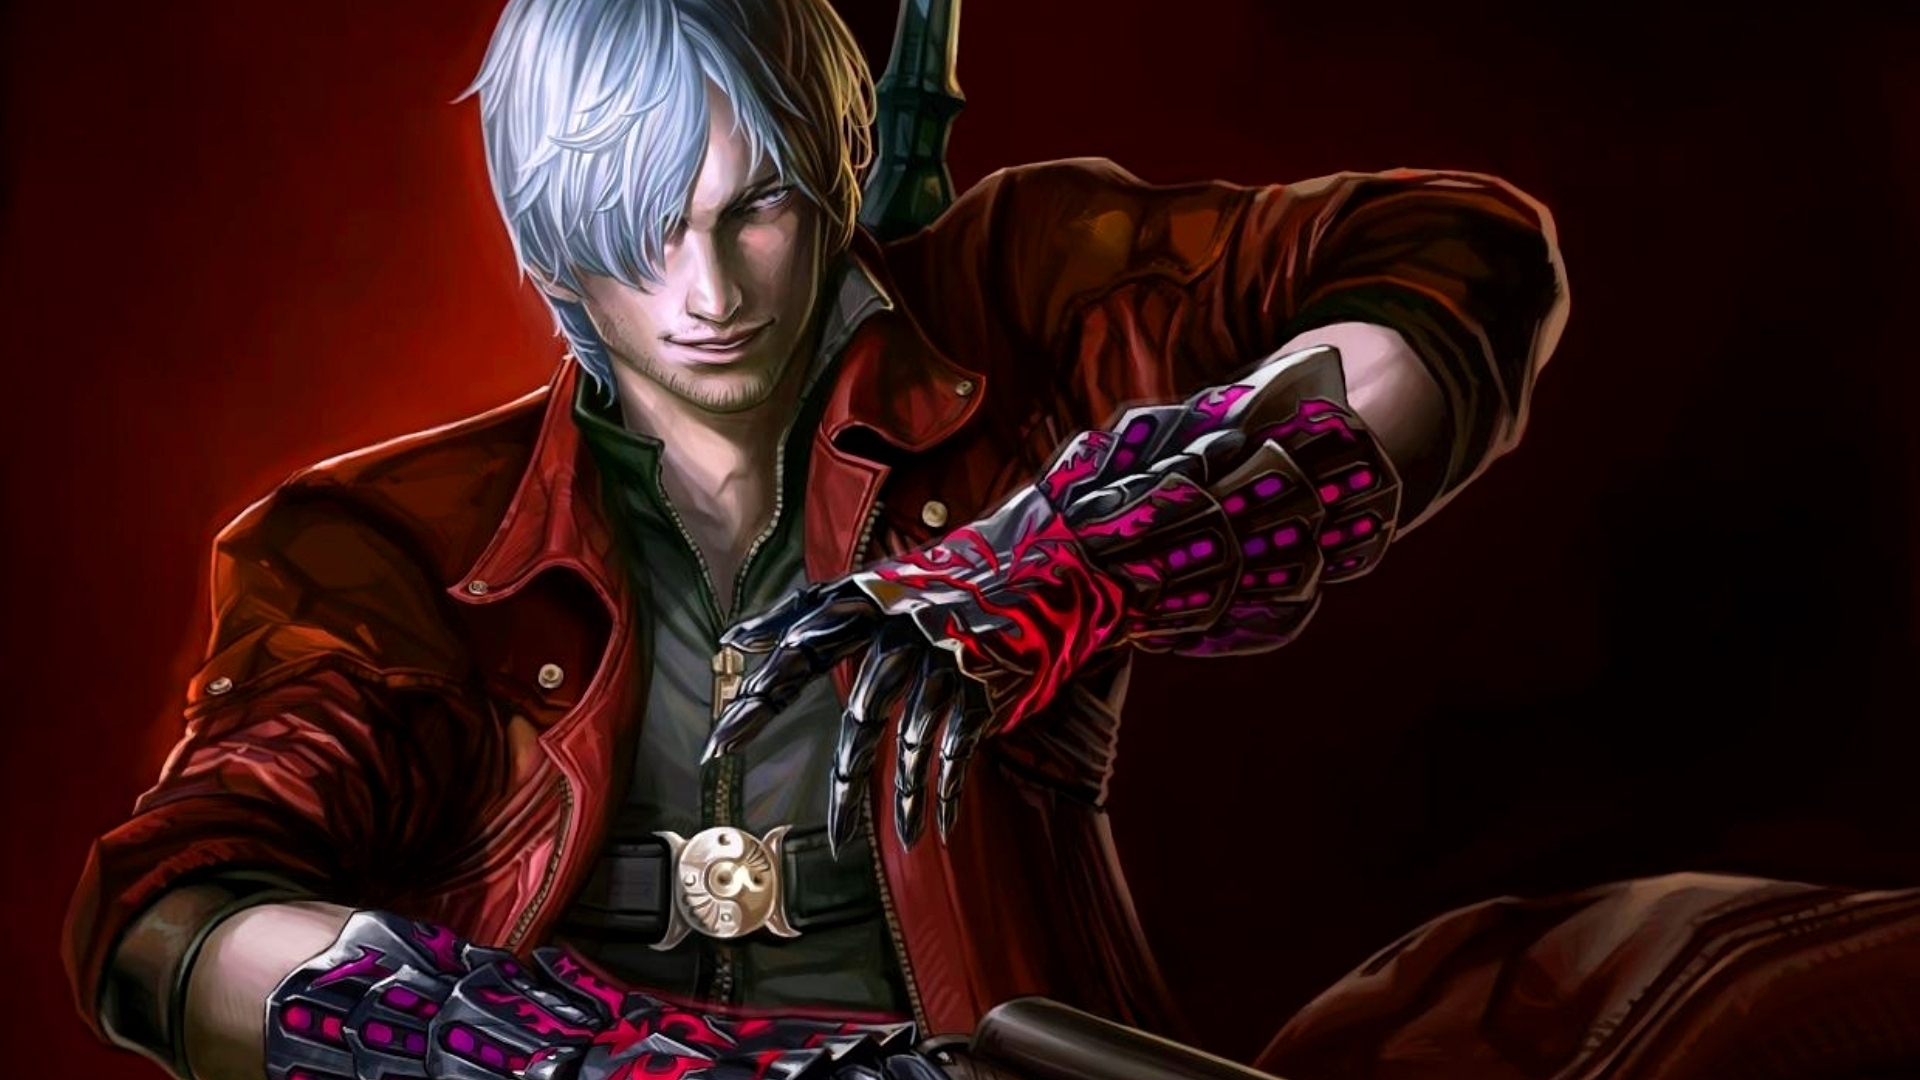 Devil May Cry 4 Game for 1920 x 1080 HDTV 1080p resolution